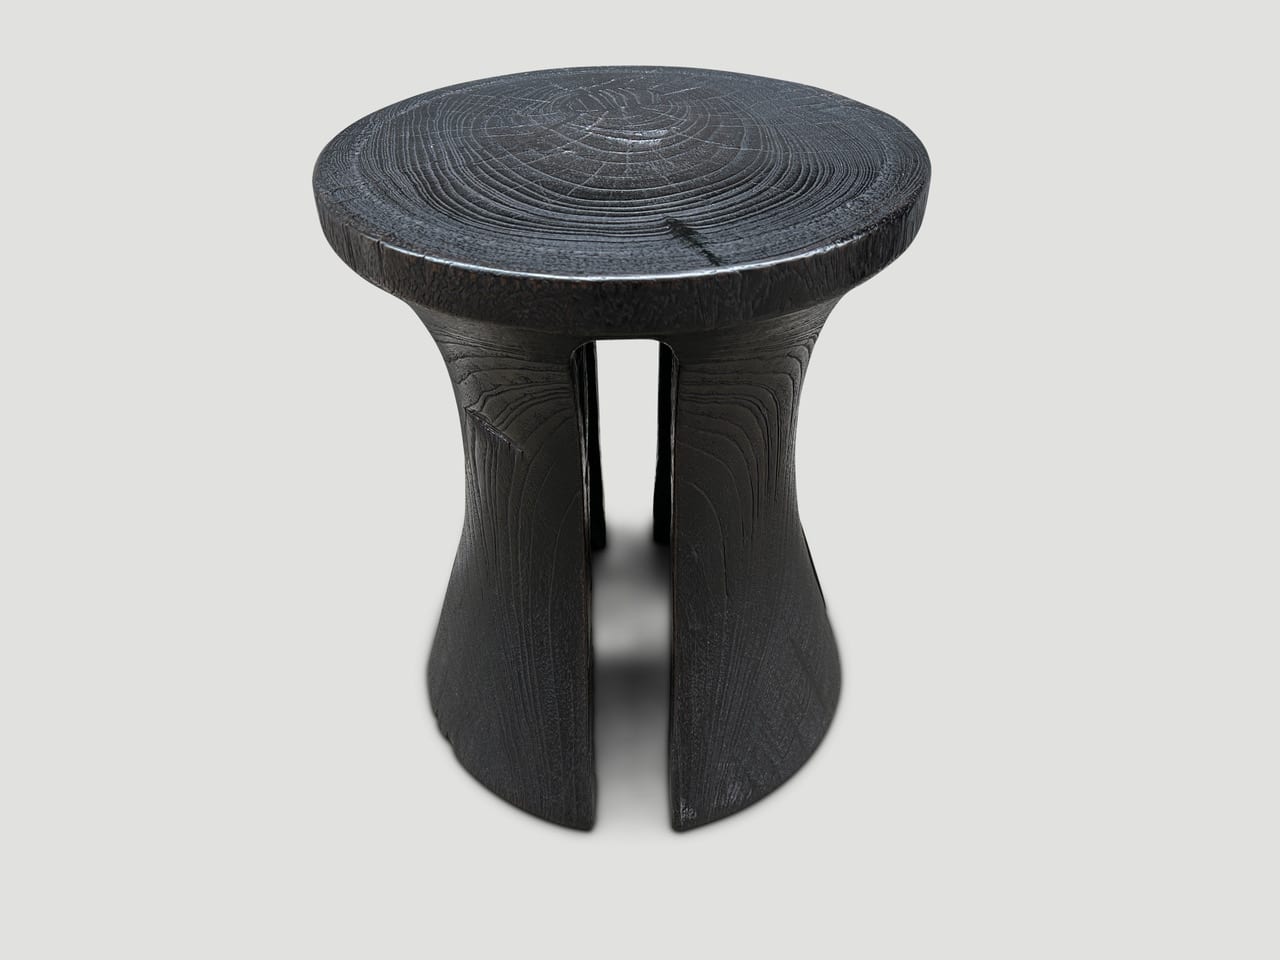 SCULPTURAL SIDE TABLE OR STOOL